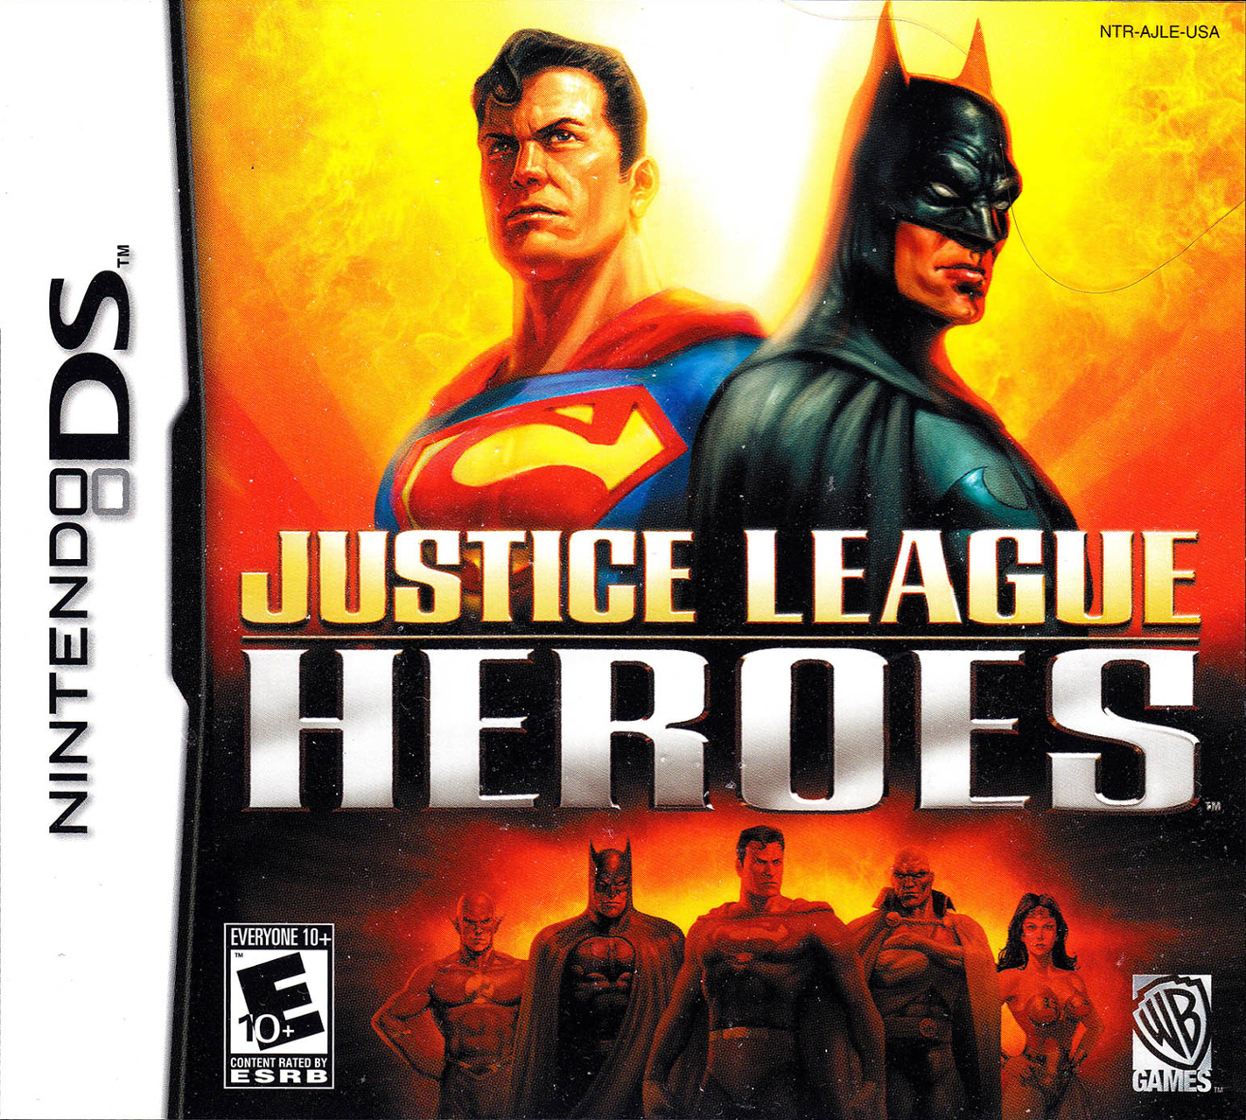 Justice League Heroes [NDS]